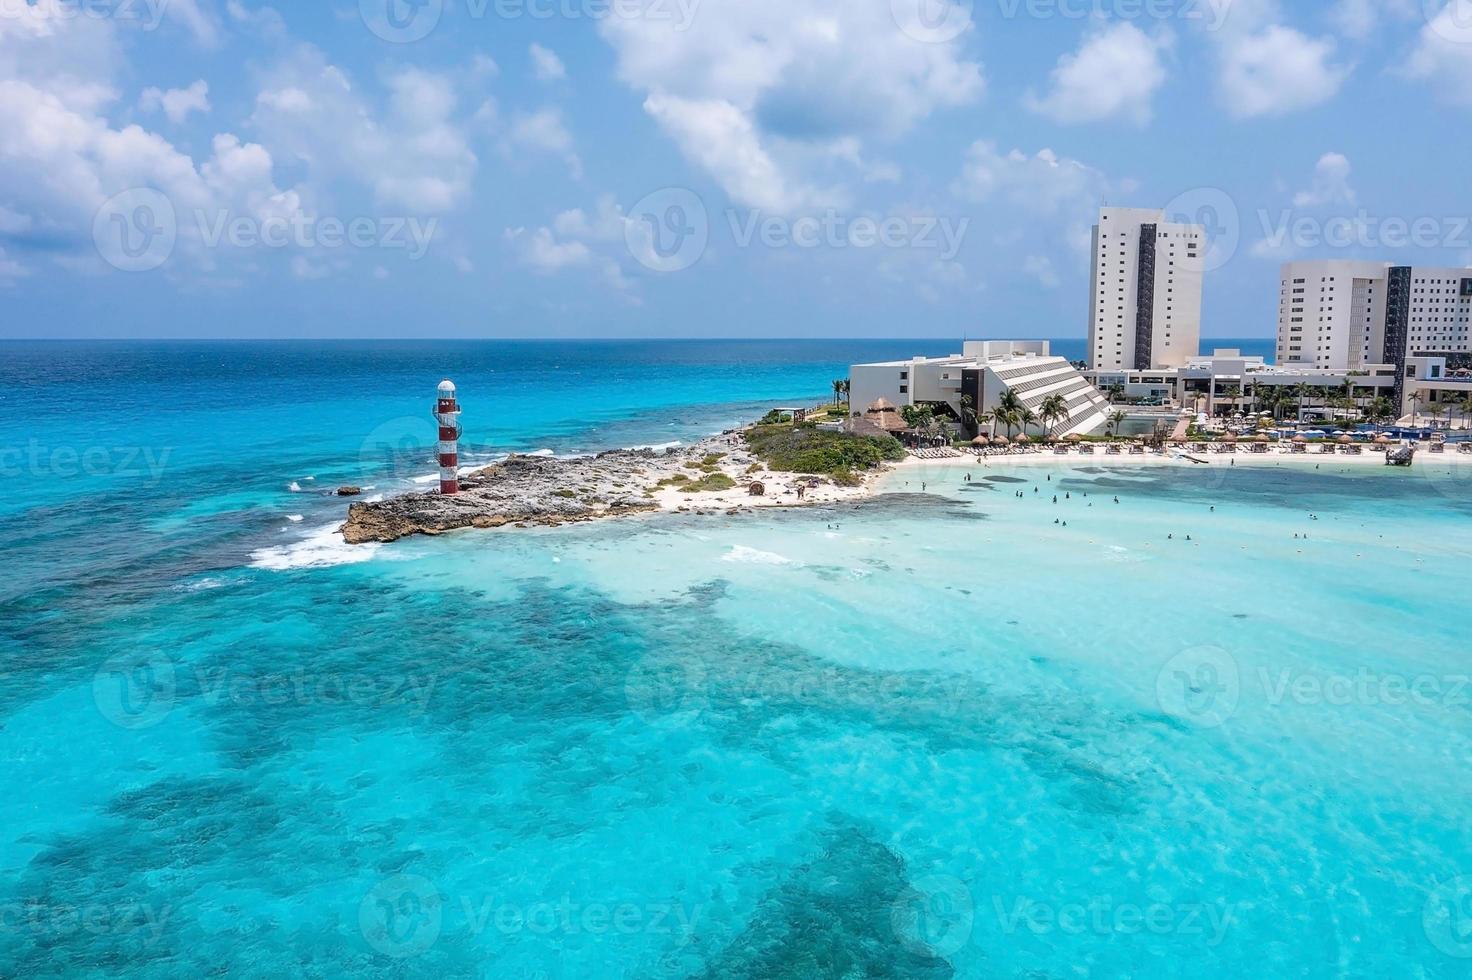 Aerial view of Punta Cancun Lighthouse photo